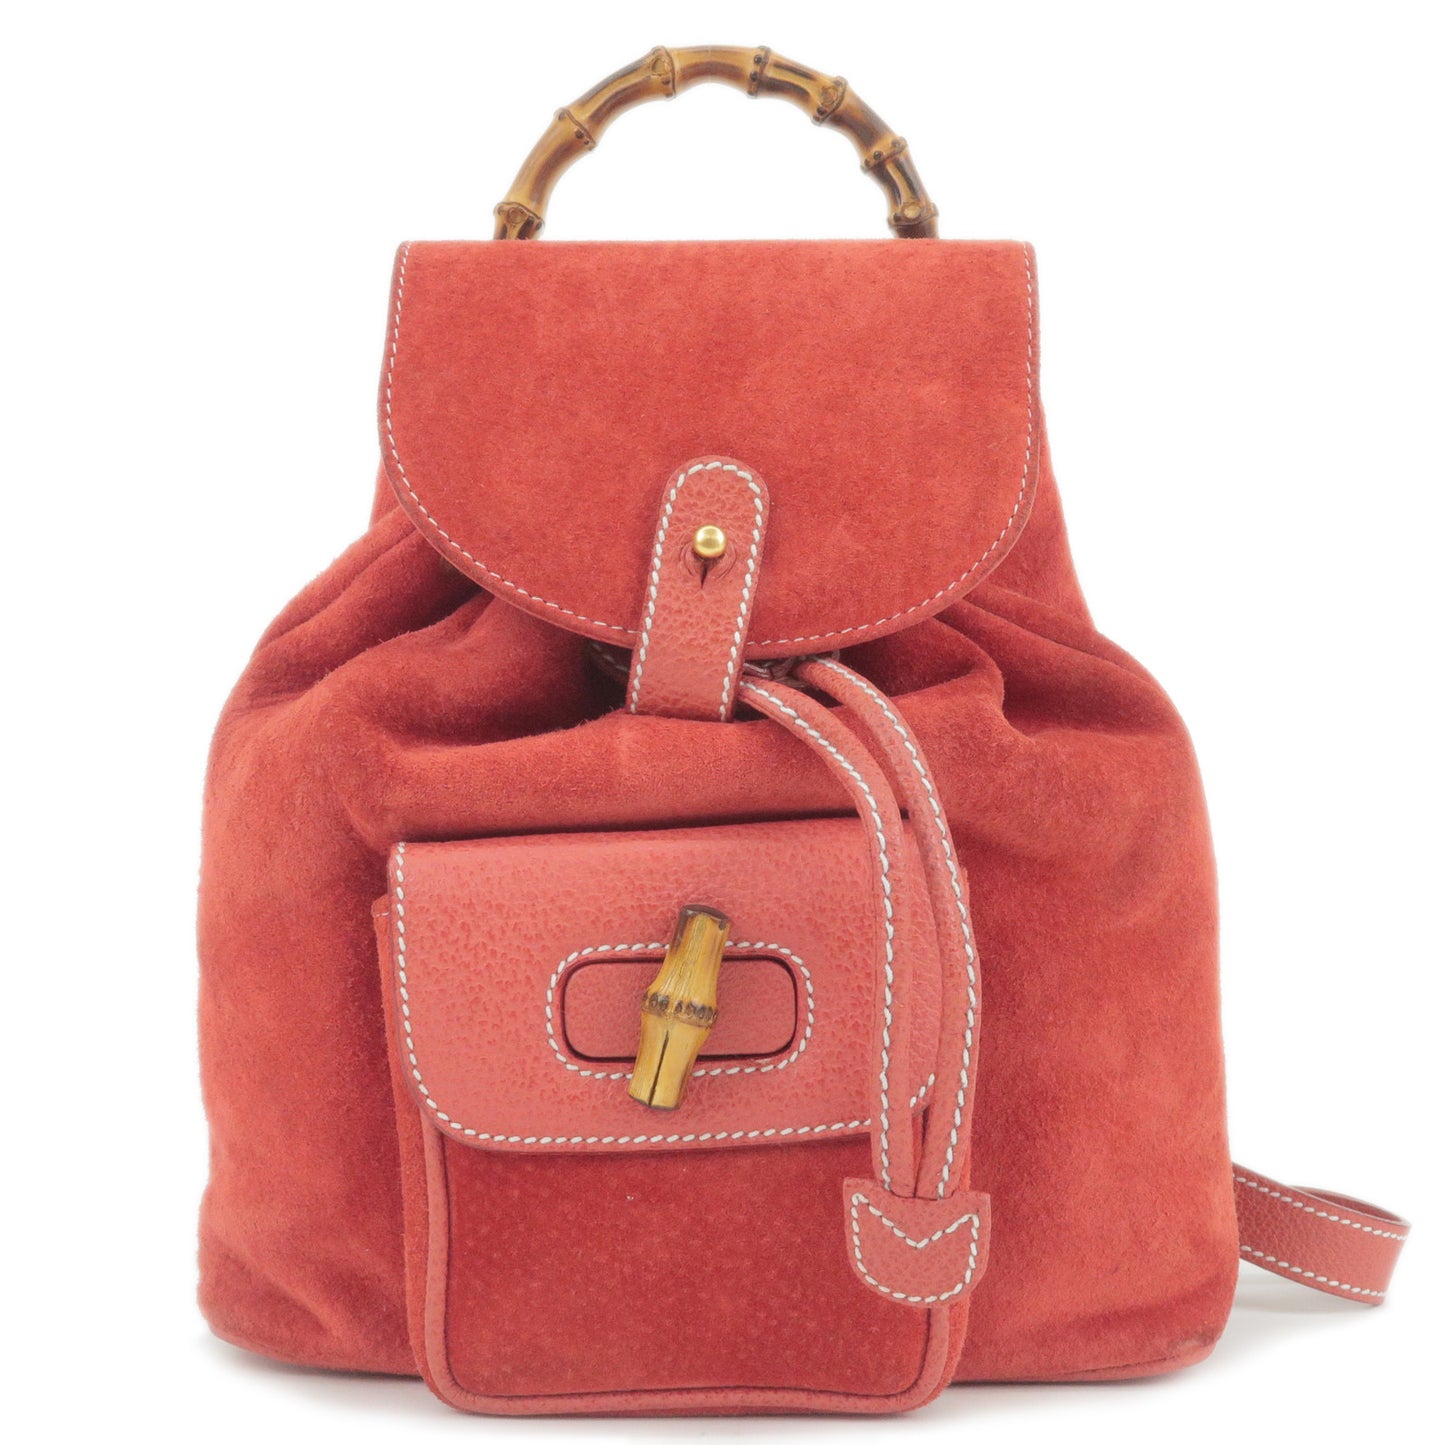 GUCCI-Bamboo-Suede-Leather-Ruck-Sack-Back-Pack-Red-003.1705.0030